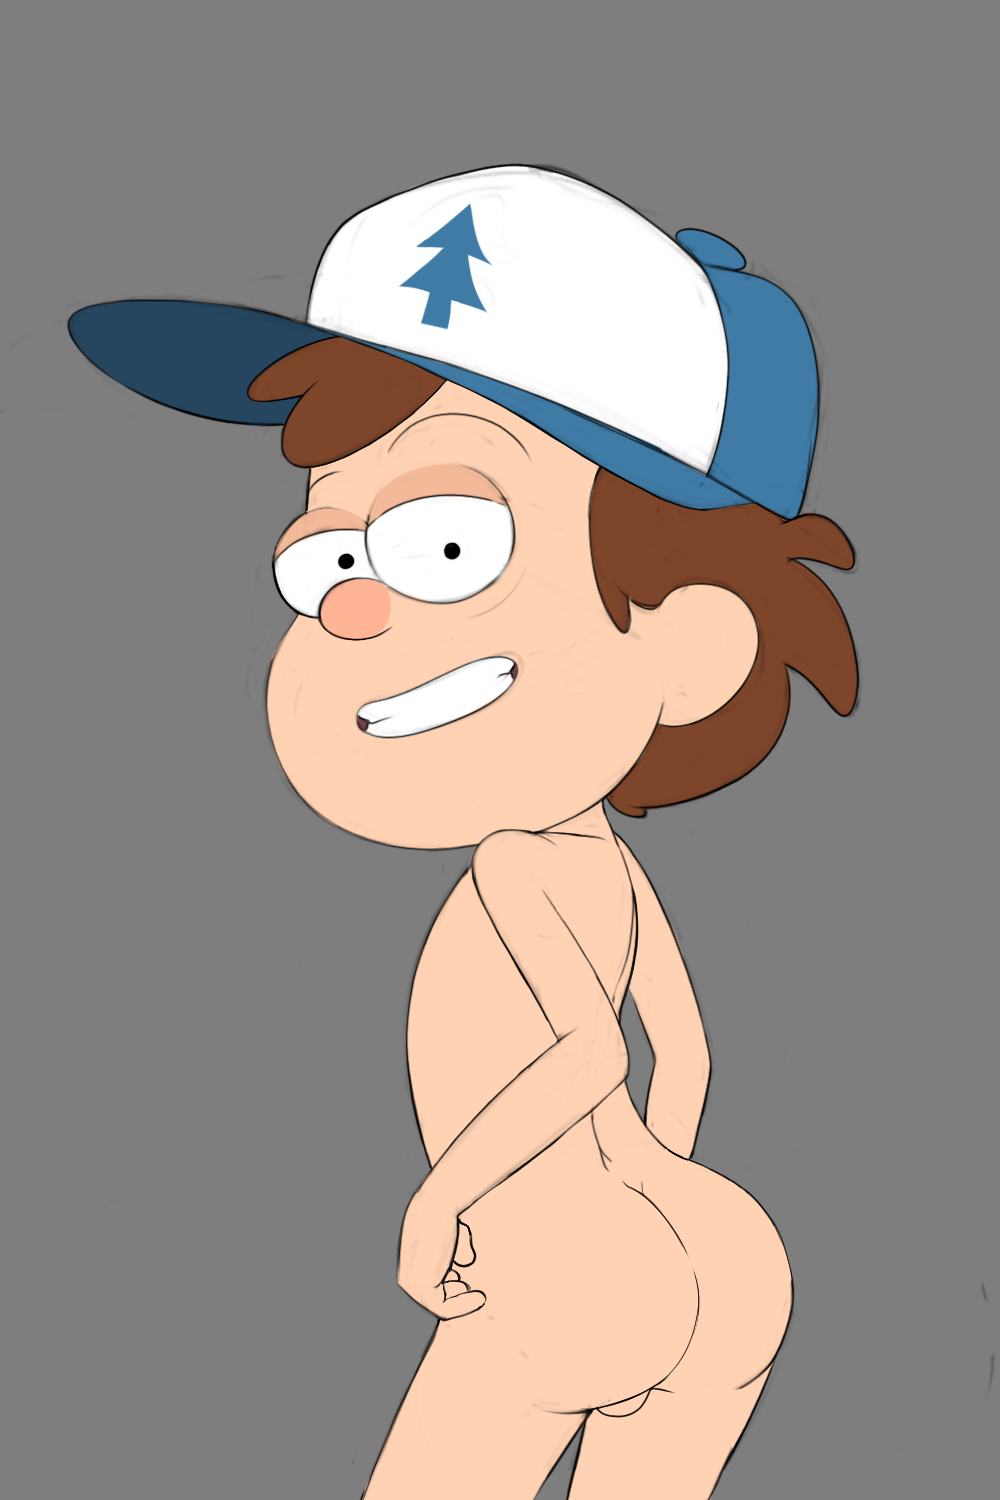 Dipper pines naked